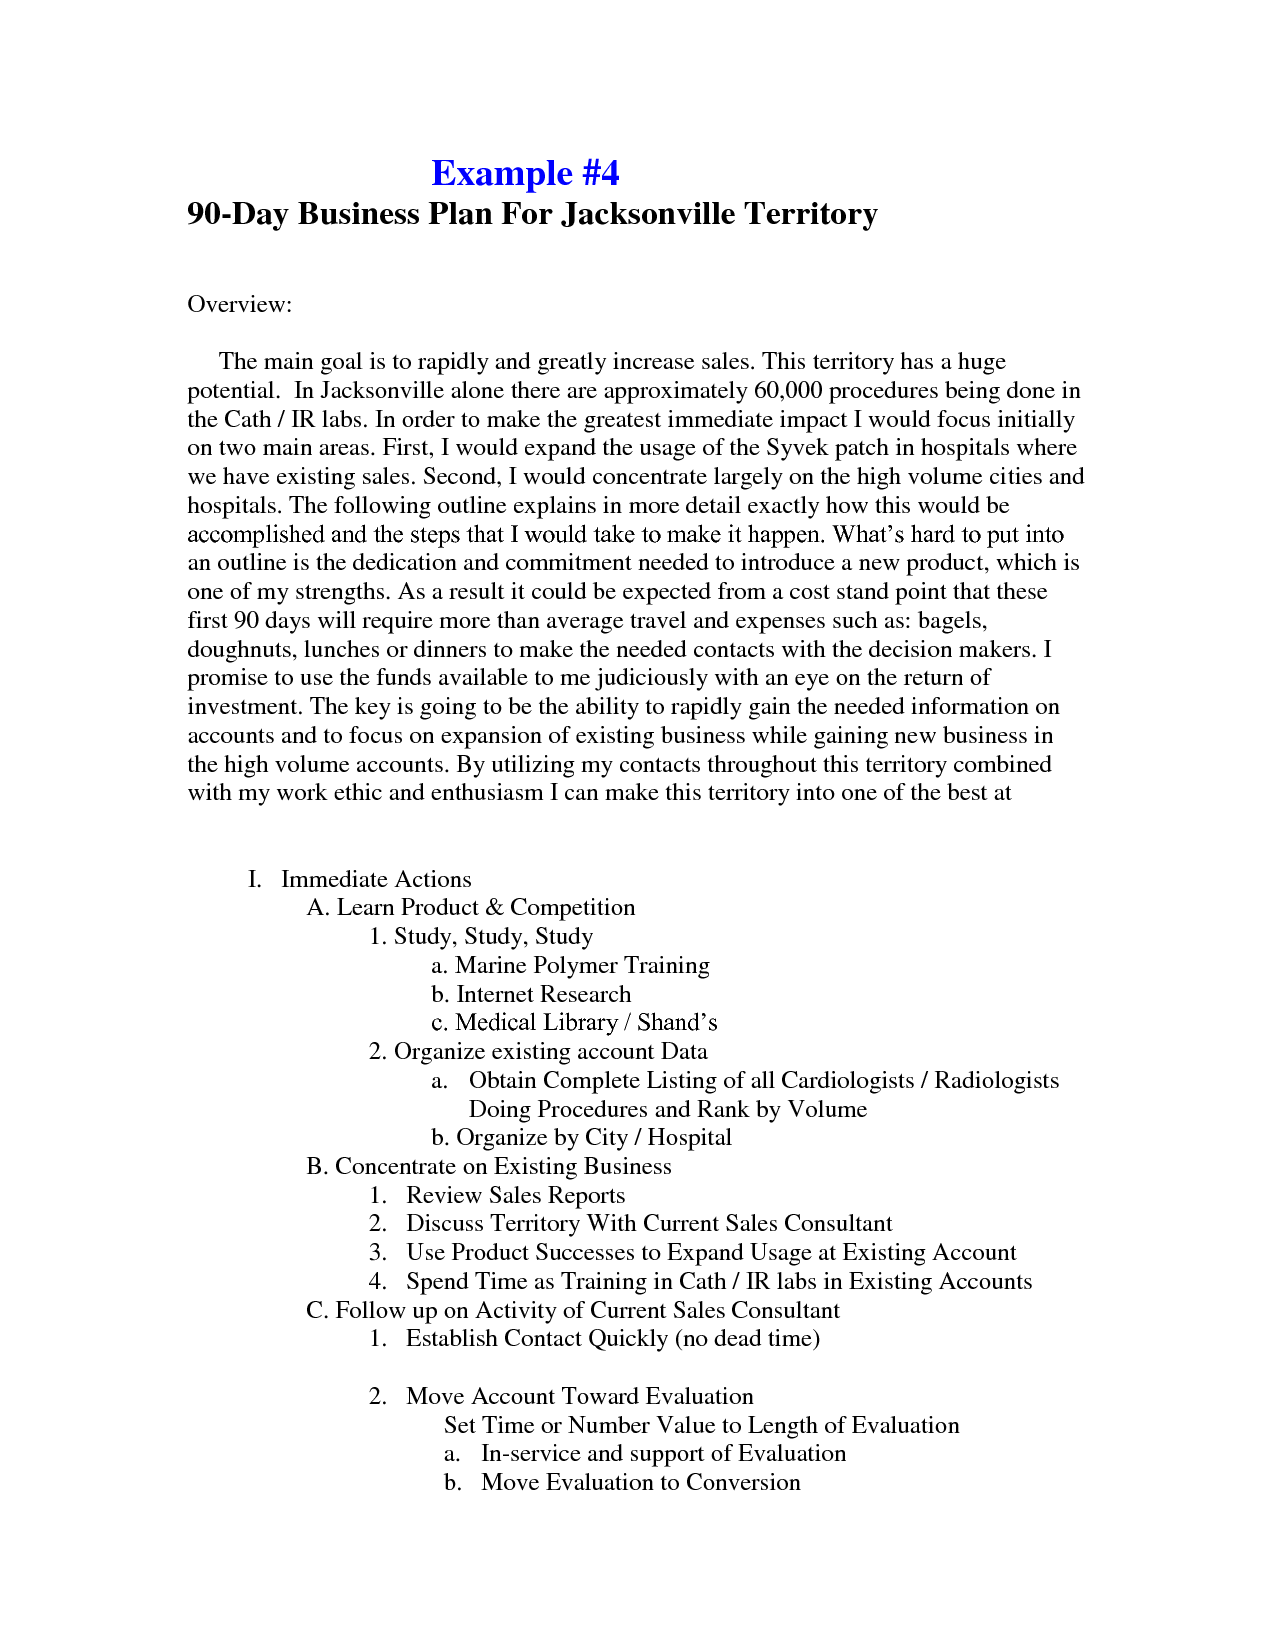 business plan template uk free nonprofit outline 90 day tx3vs1nh v 